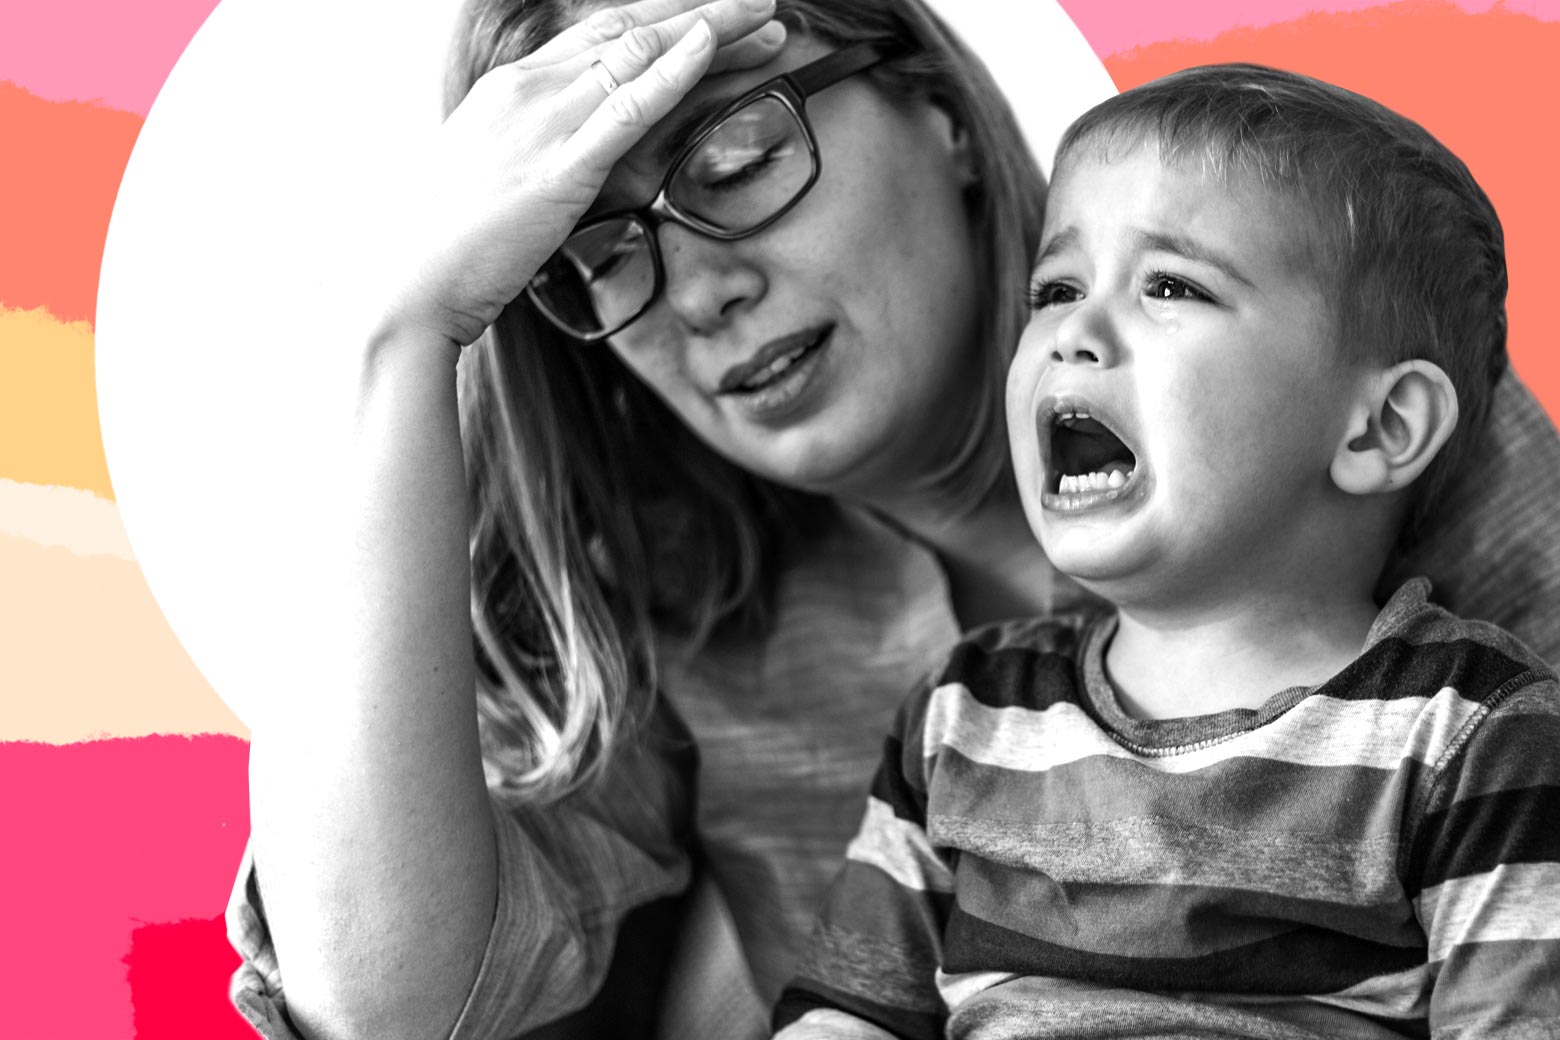 A tired woman, wearing glasses, puts her hand to her head as her kid cries.